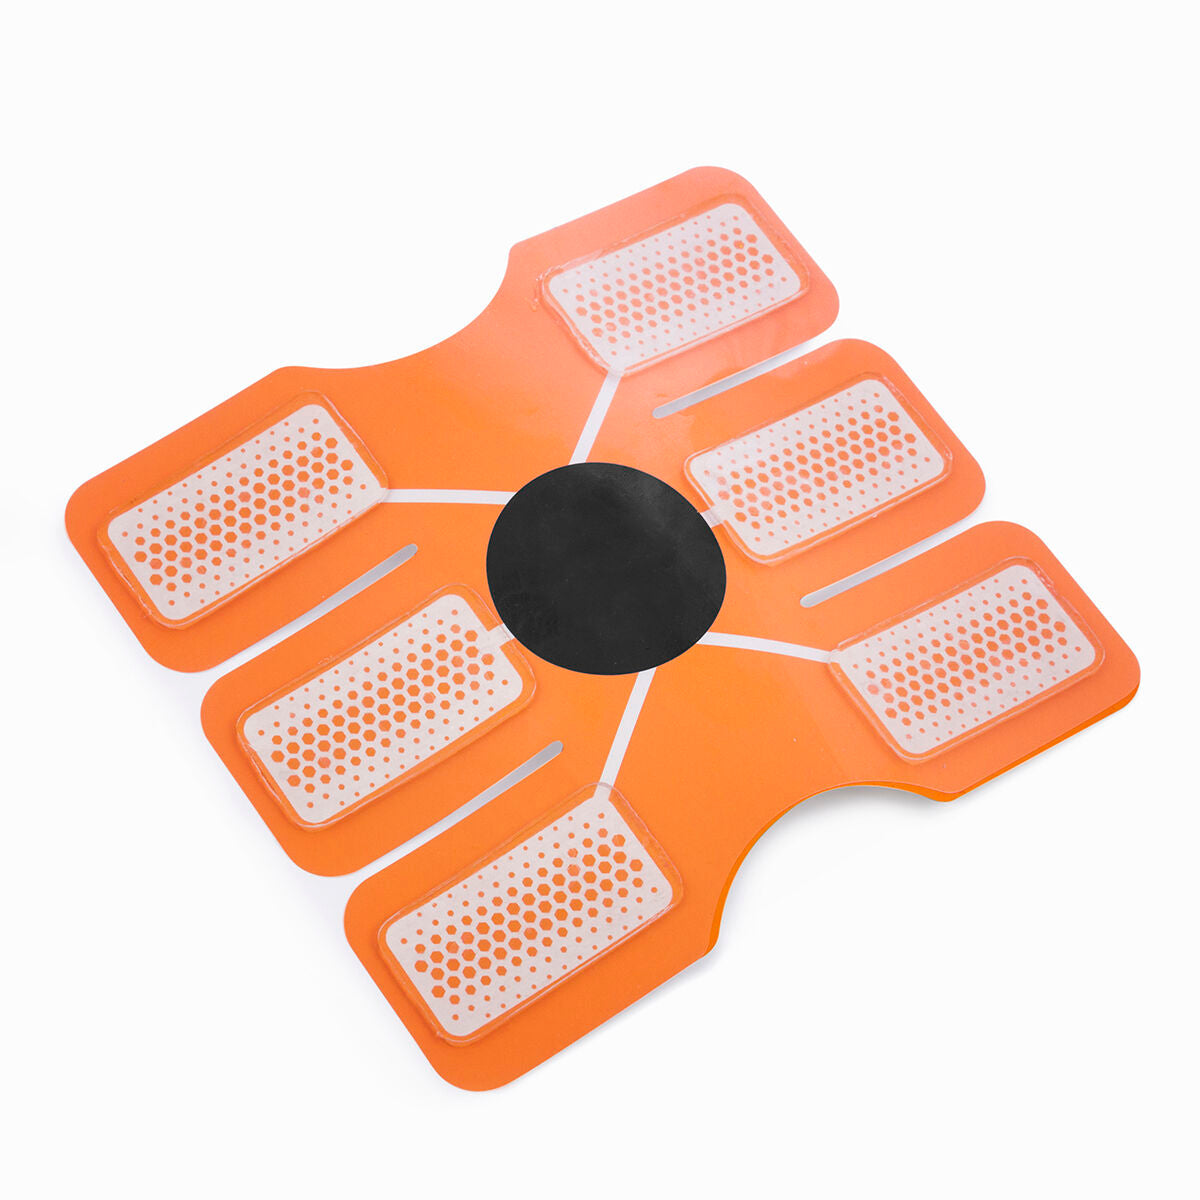 InnovaGoods Electro-Trainer Abs Patch